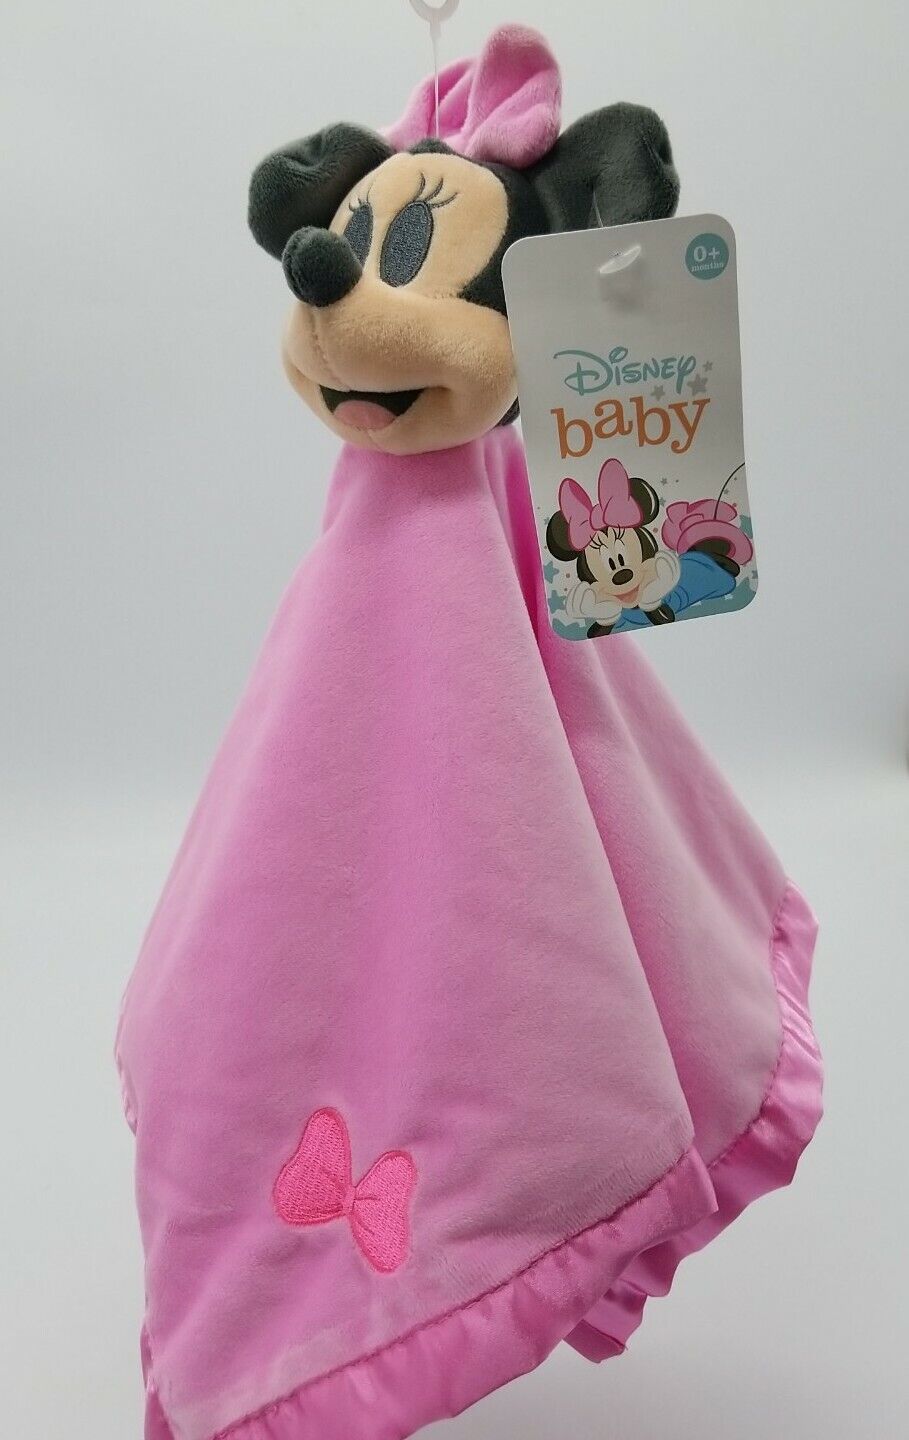 Disney Minnie Mouse Blankee Security Blanket Baby Lovey Pink Girl Shower Gift